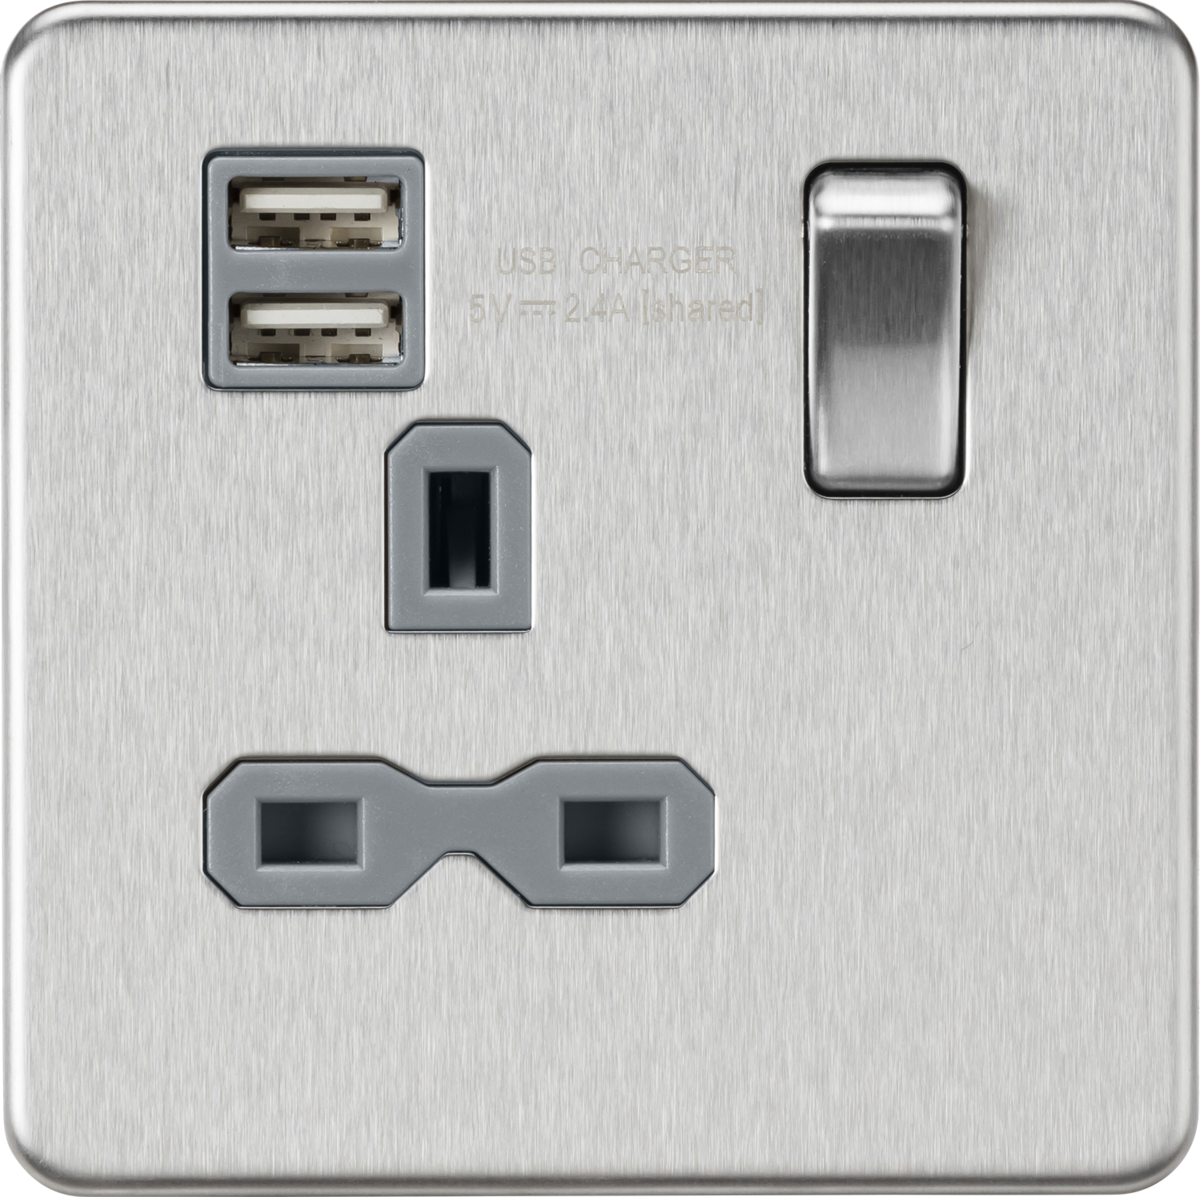 Screwless 13A 1G switched socket with dual USB charger (2.4A) - brushed chrome with grey insert